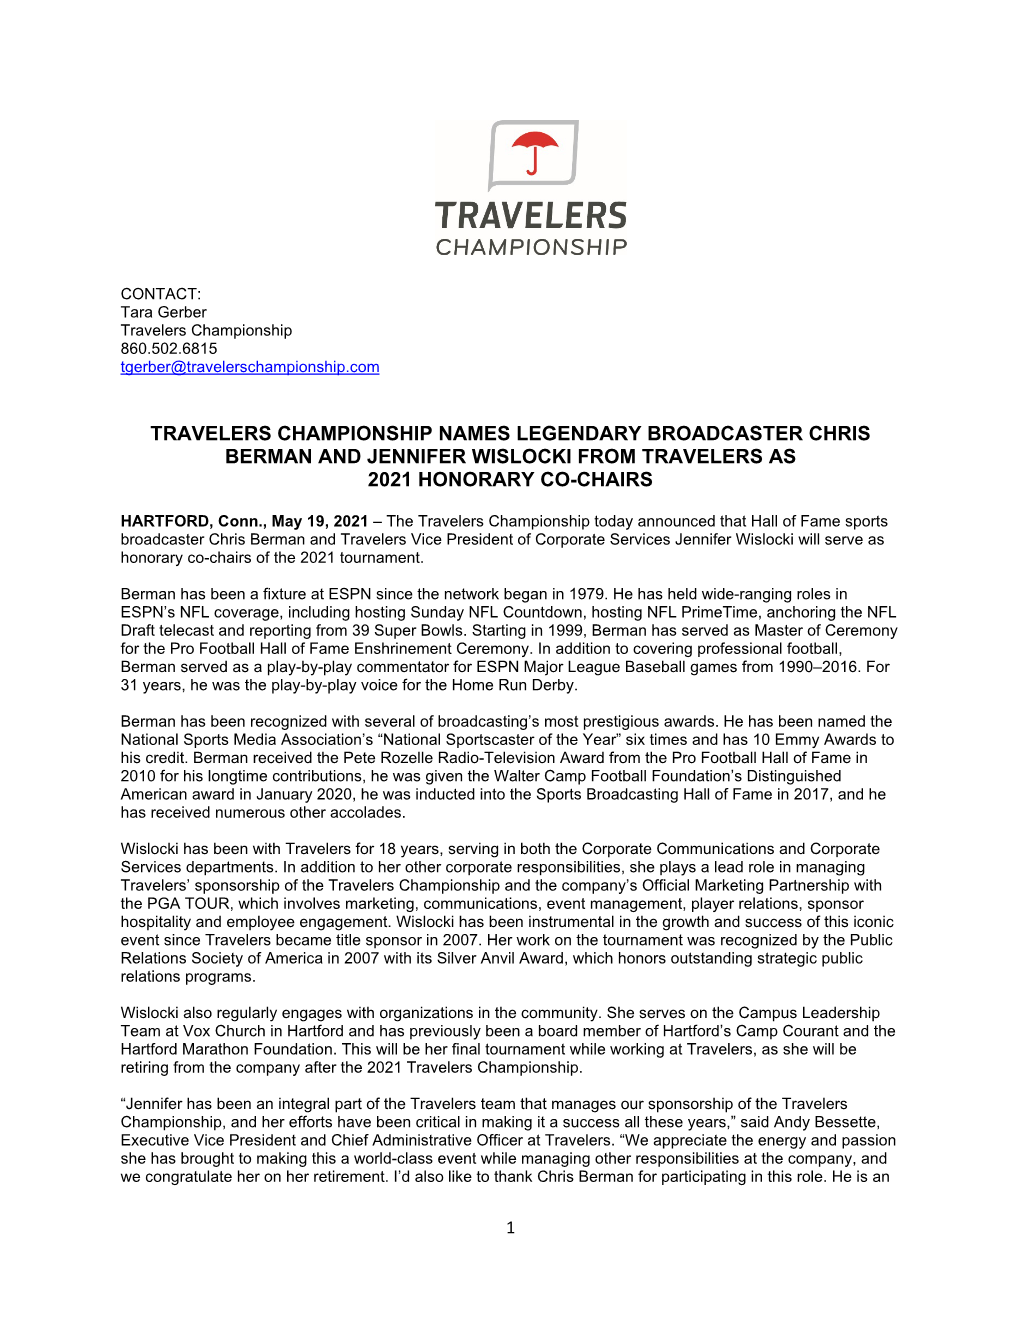 Travelers Championship Names Legendary Broadcaster Chris Berman and Jennifer Wislocki from Travelers As 2021 Honorary Co-Chairs